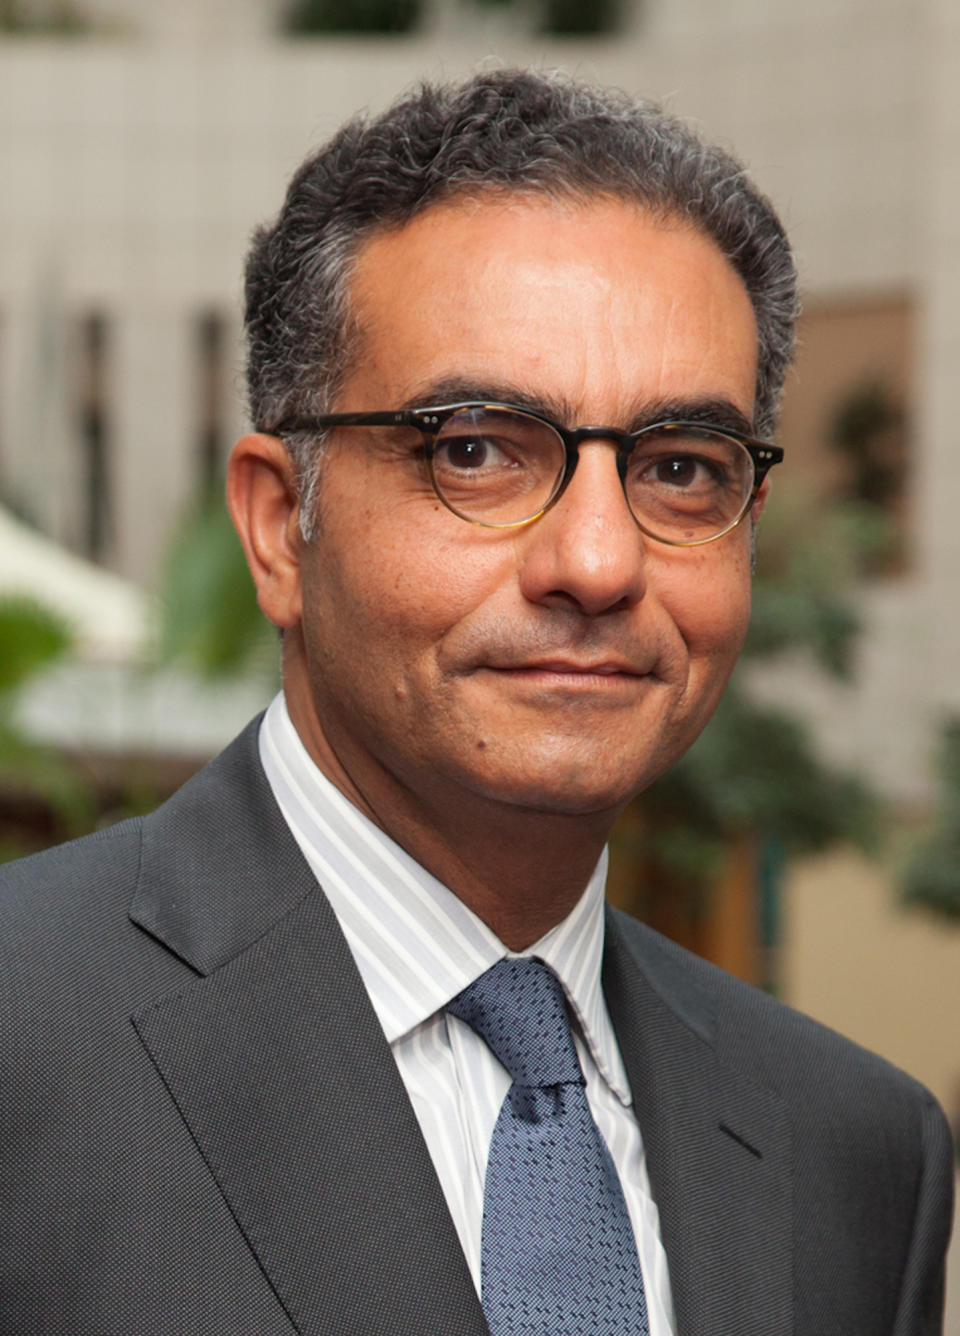 Fadi Chehade is seen in an undated photo made available by the Internet Corporation for Assigned Names and Numbers (ICANN) on Friday, June 22, 2012. Chehade, 50, will be the next CEO of ICANN, the company announced Friday. He will replace former U.S. cybersecurity chief Rod Beckstrom as chief executive. (AP Photo/Internet Corporation for Assigned Names and Numbers)